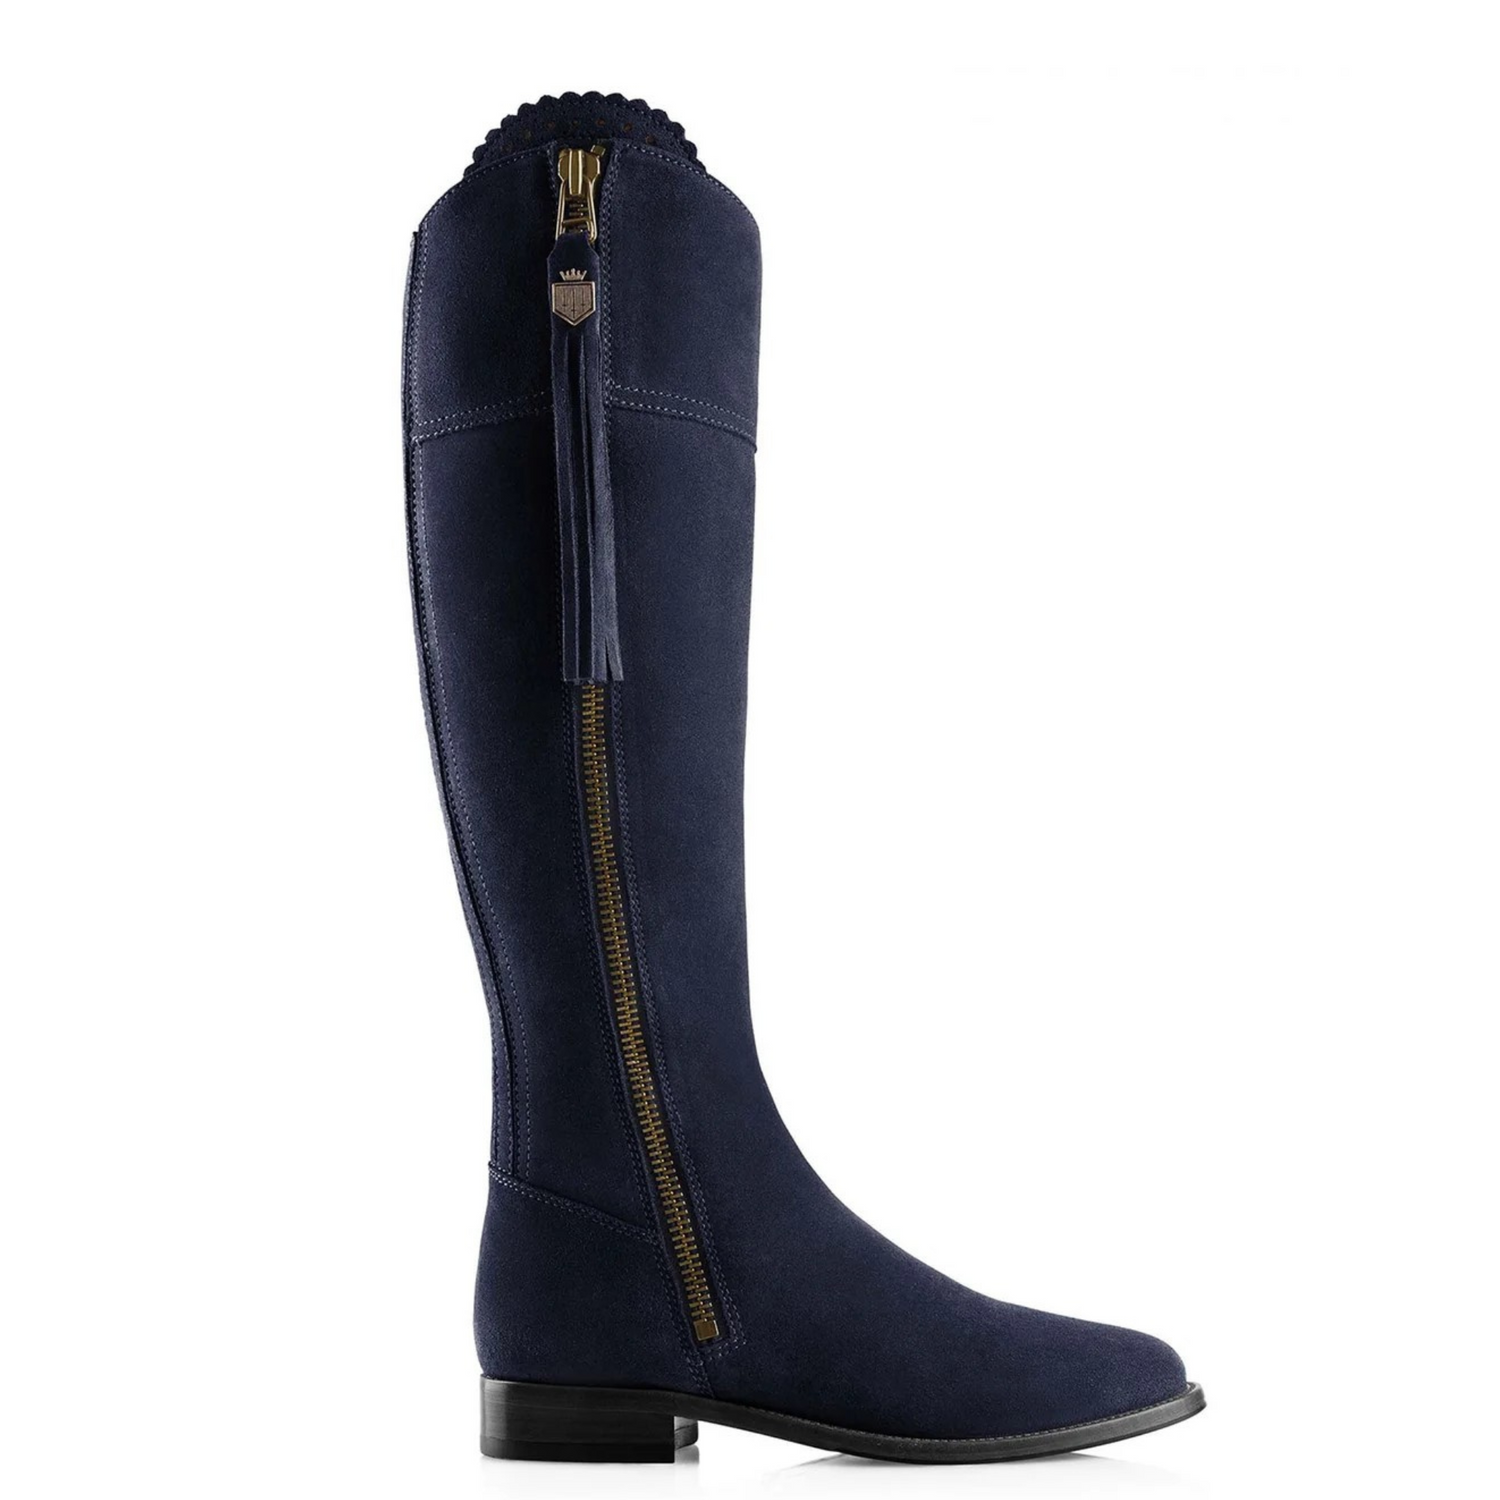 The Regina Sporting Fit Navy Suede